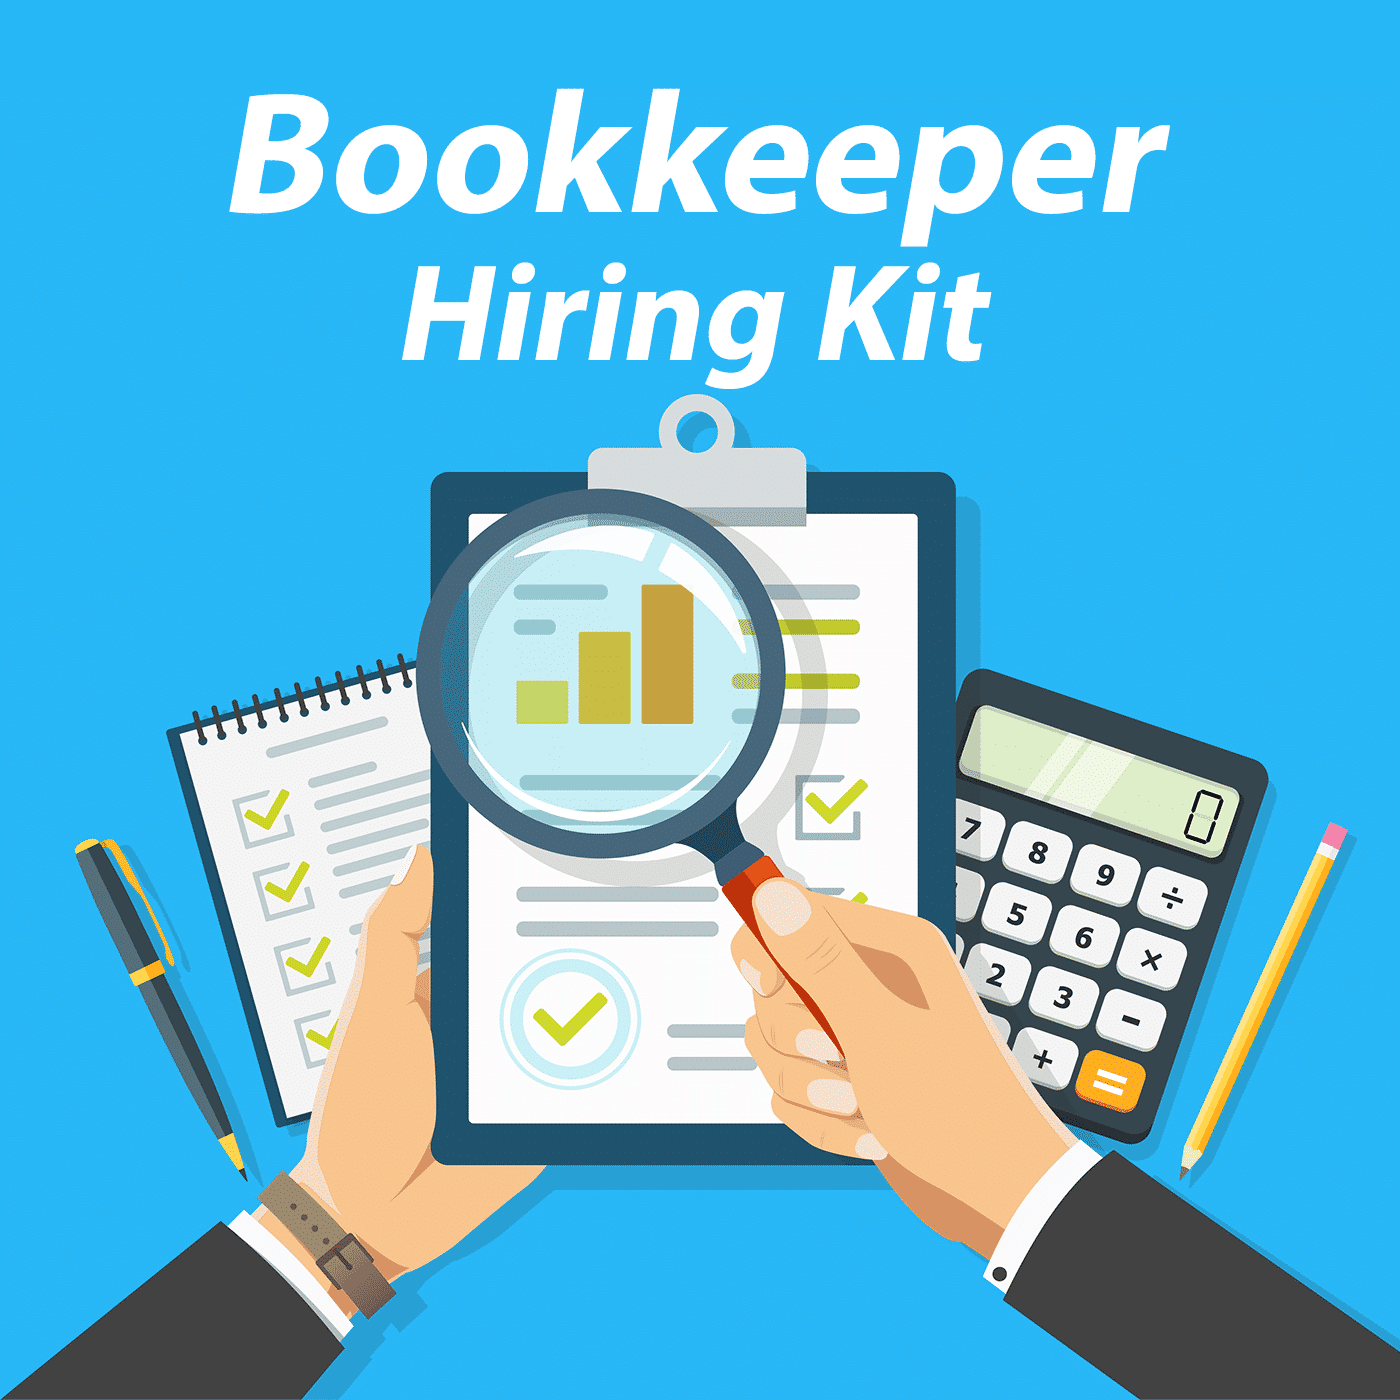 Bookkeeper Hiring And Onboarding Kit All In One Field Service Management Software By Aptora